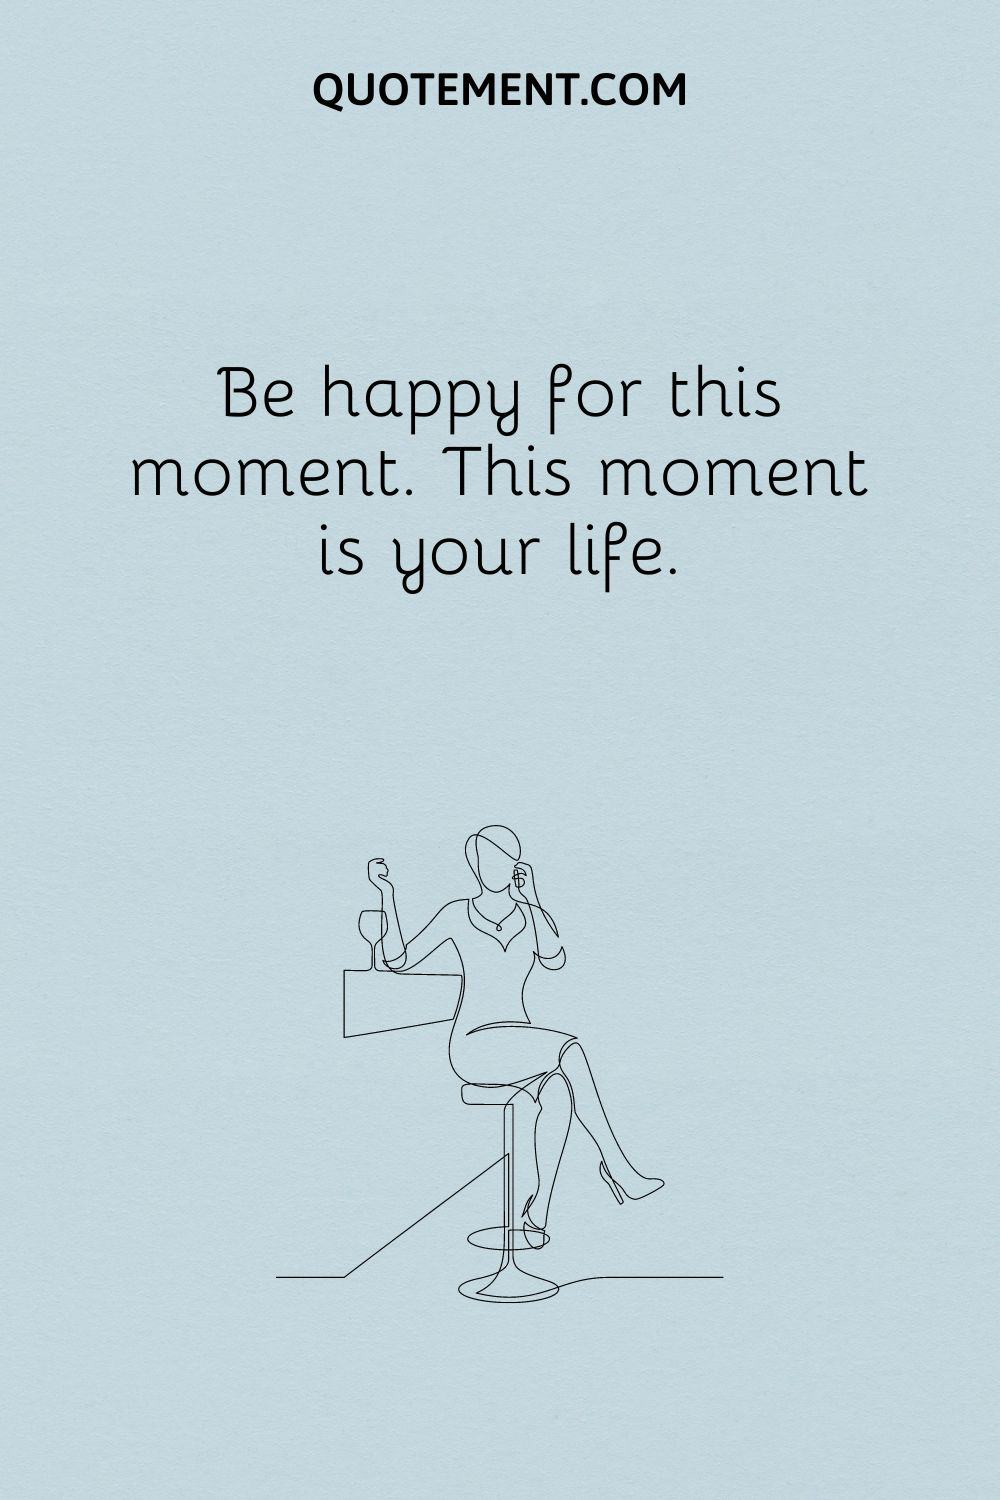 Be happy for this moment.